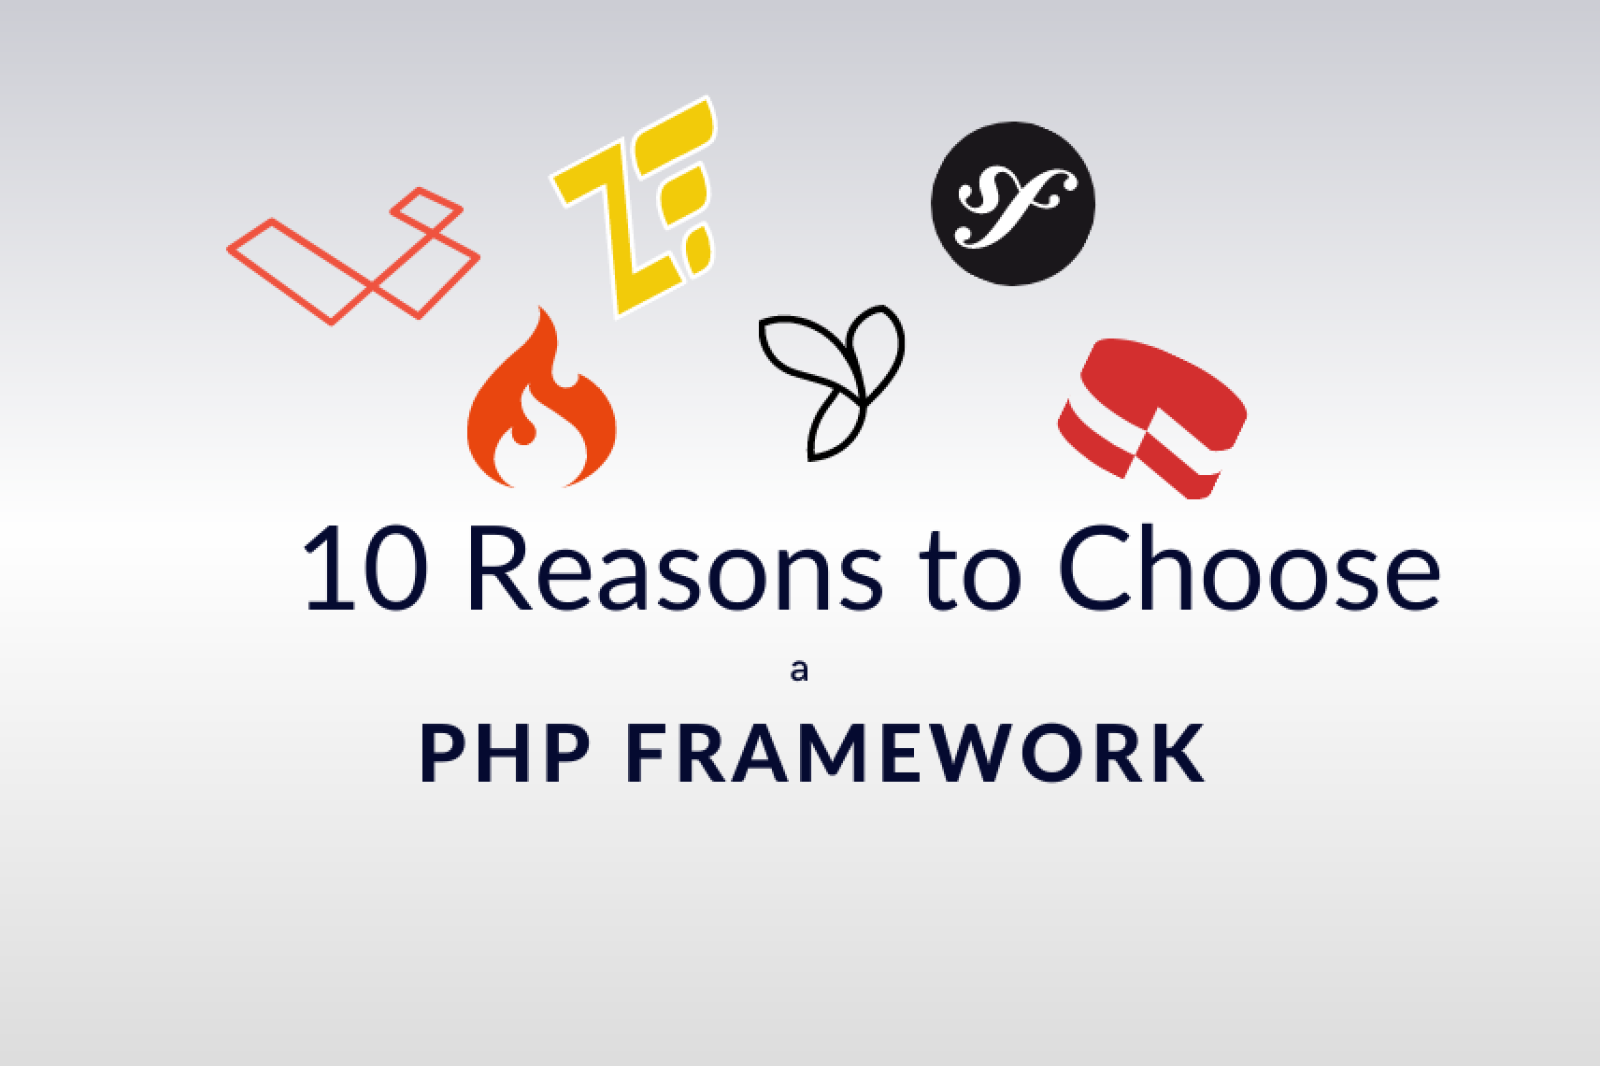 10 Reasons to Choose a PHP Framework for Your Next Web Project